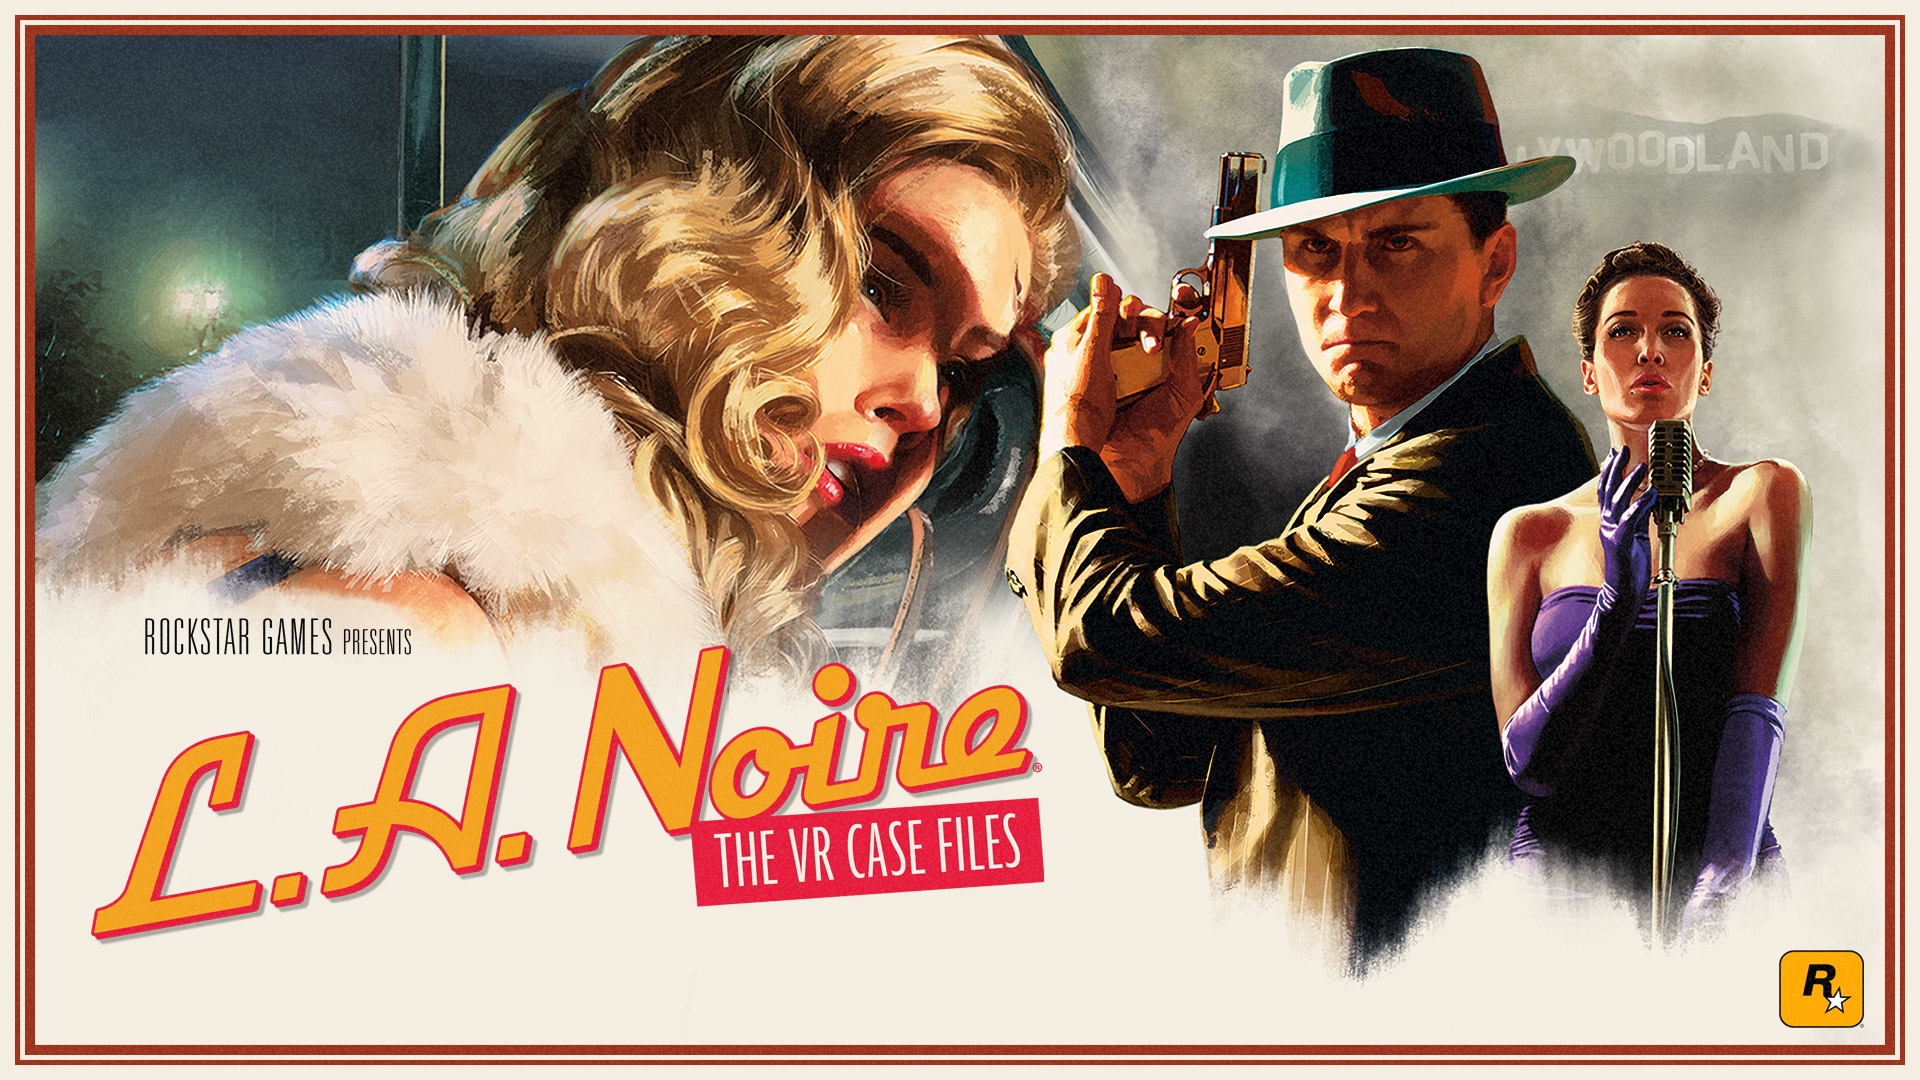 'L.A. Noire: The VR Case Files' is available now for HTC Vive | DeviceDaily.com